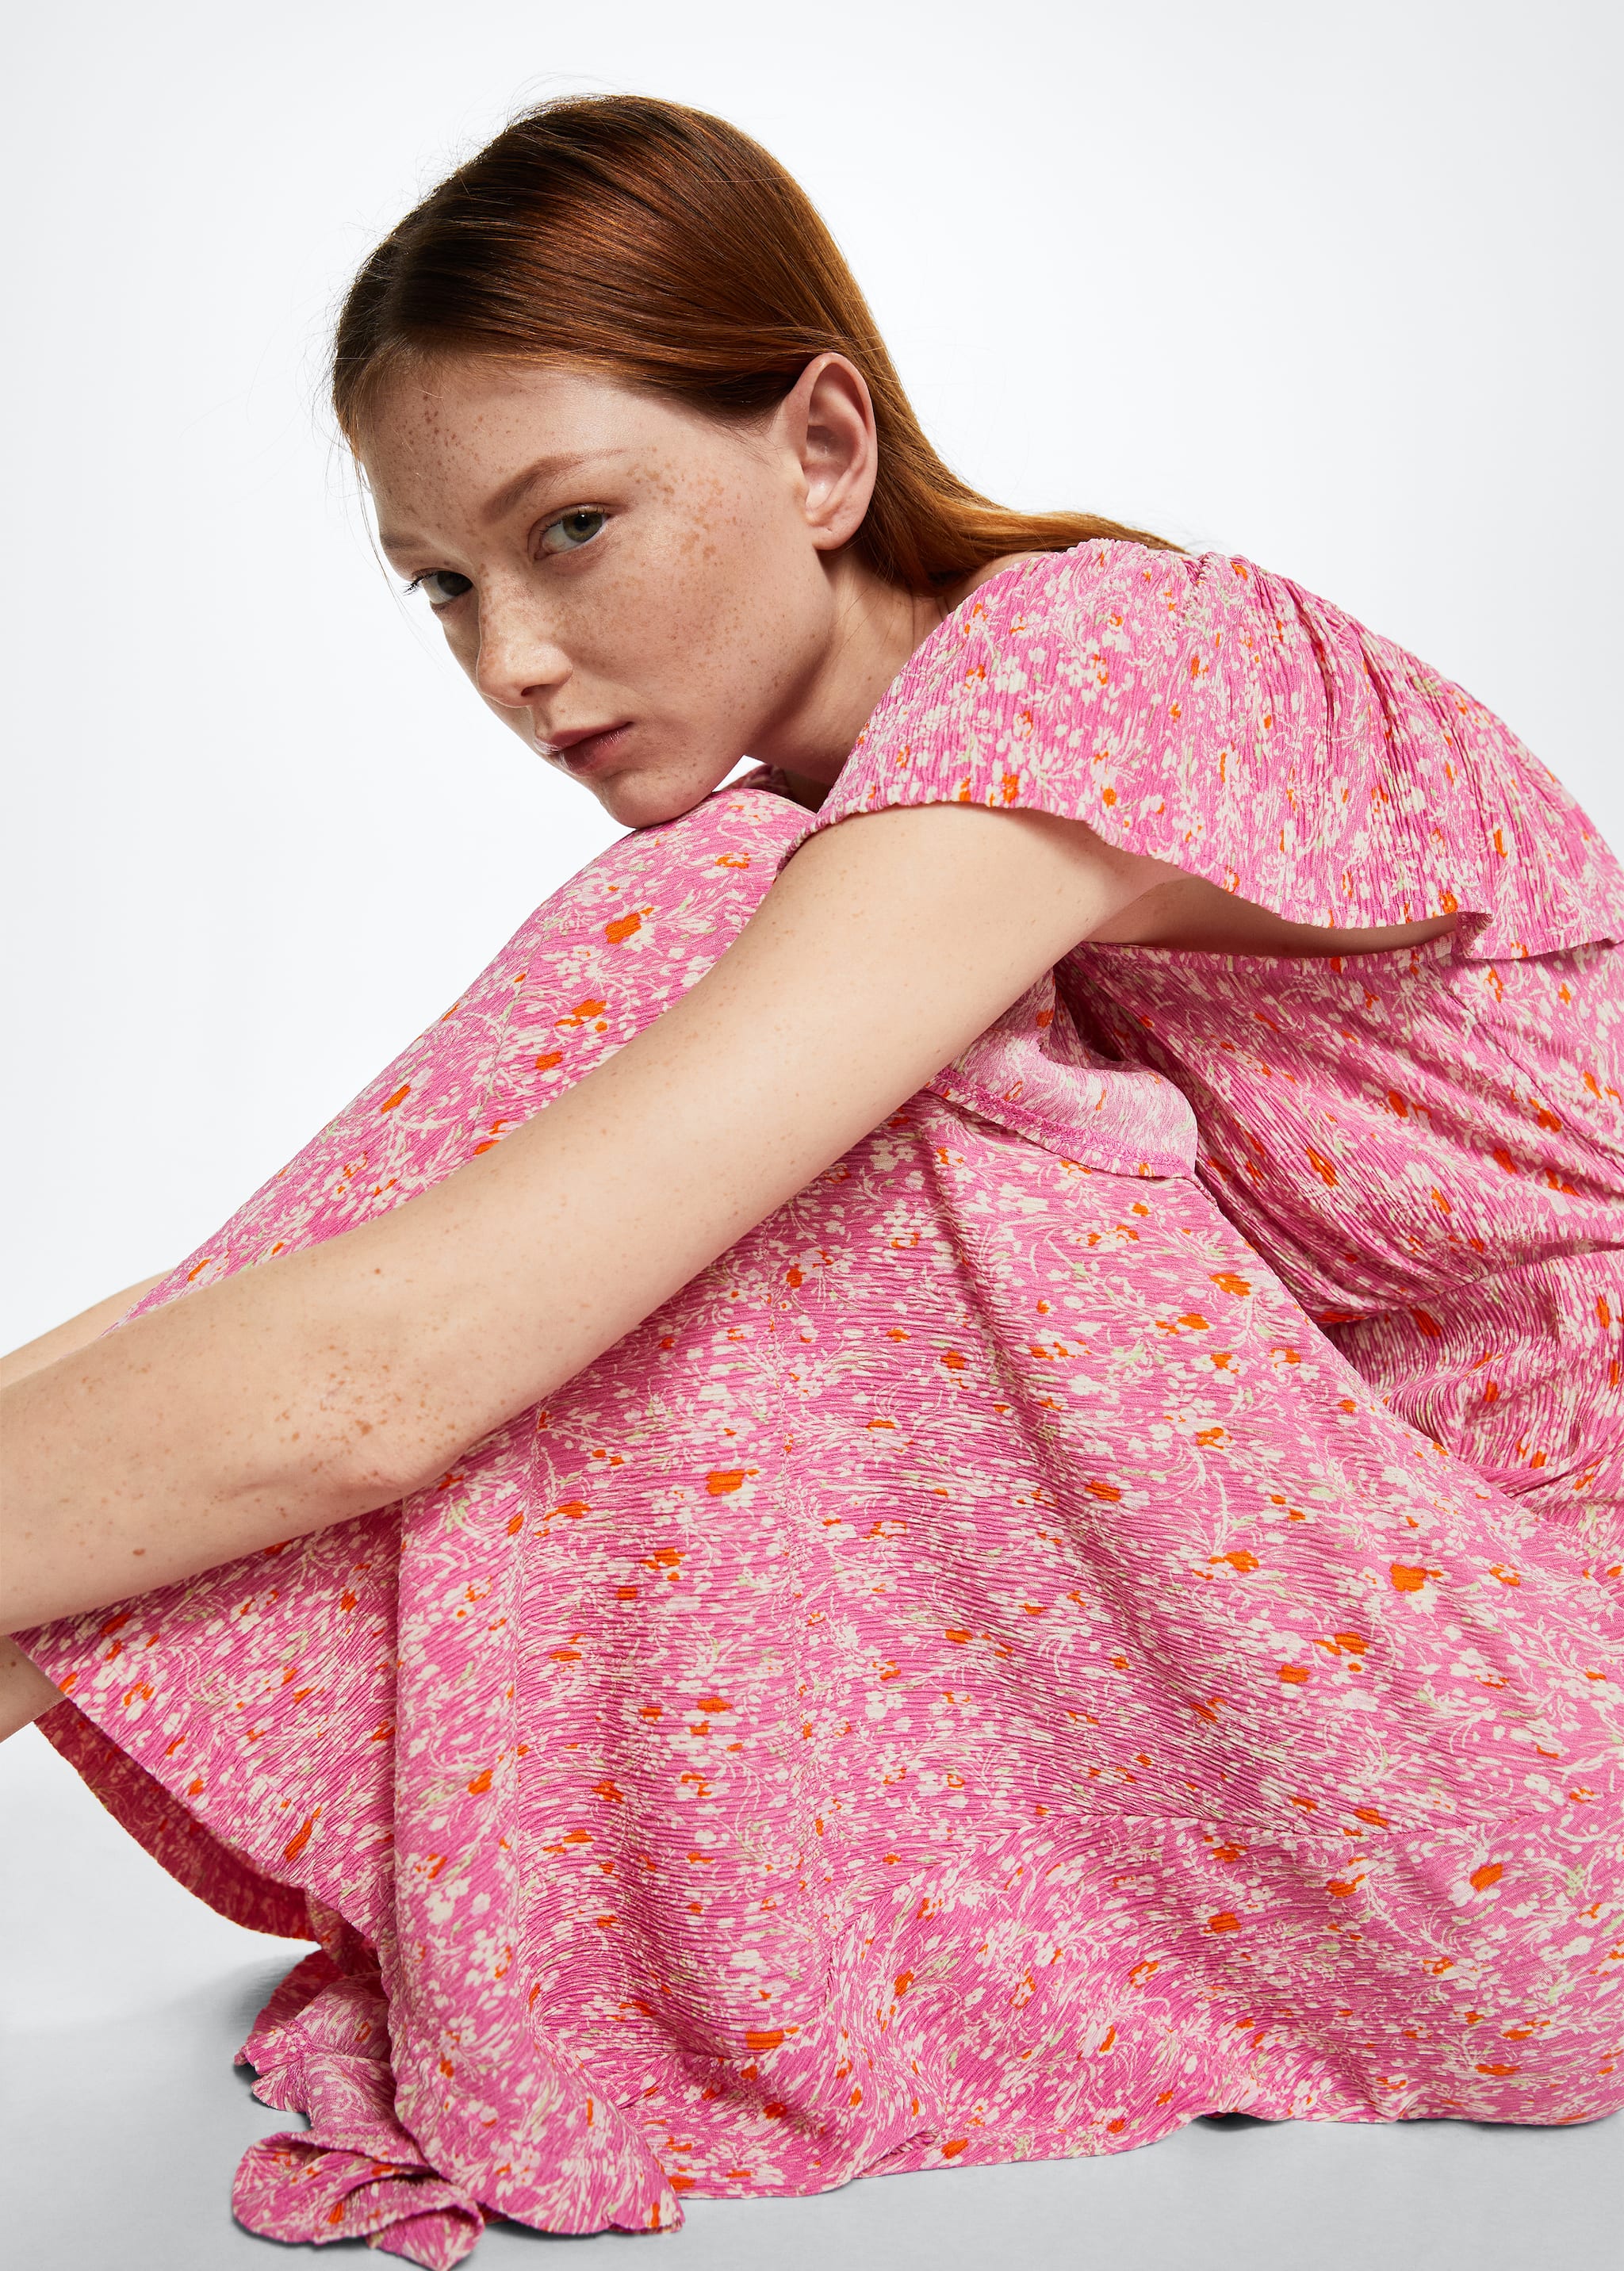 Floral print dress - Details of the article 2